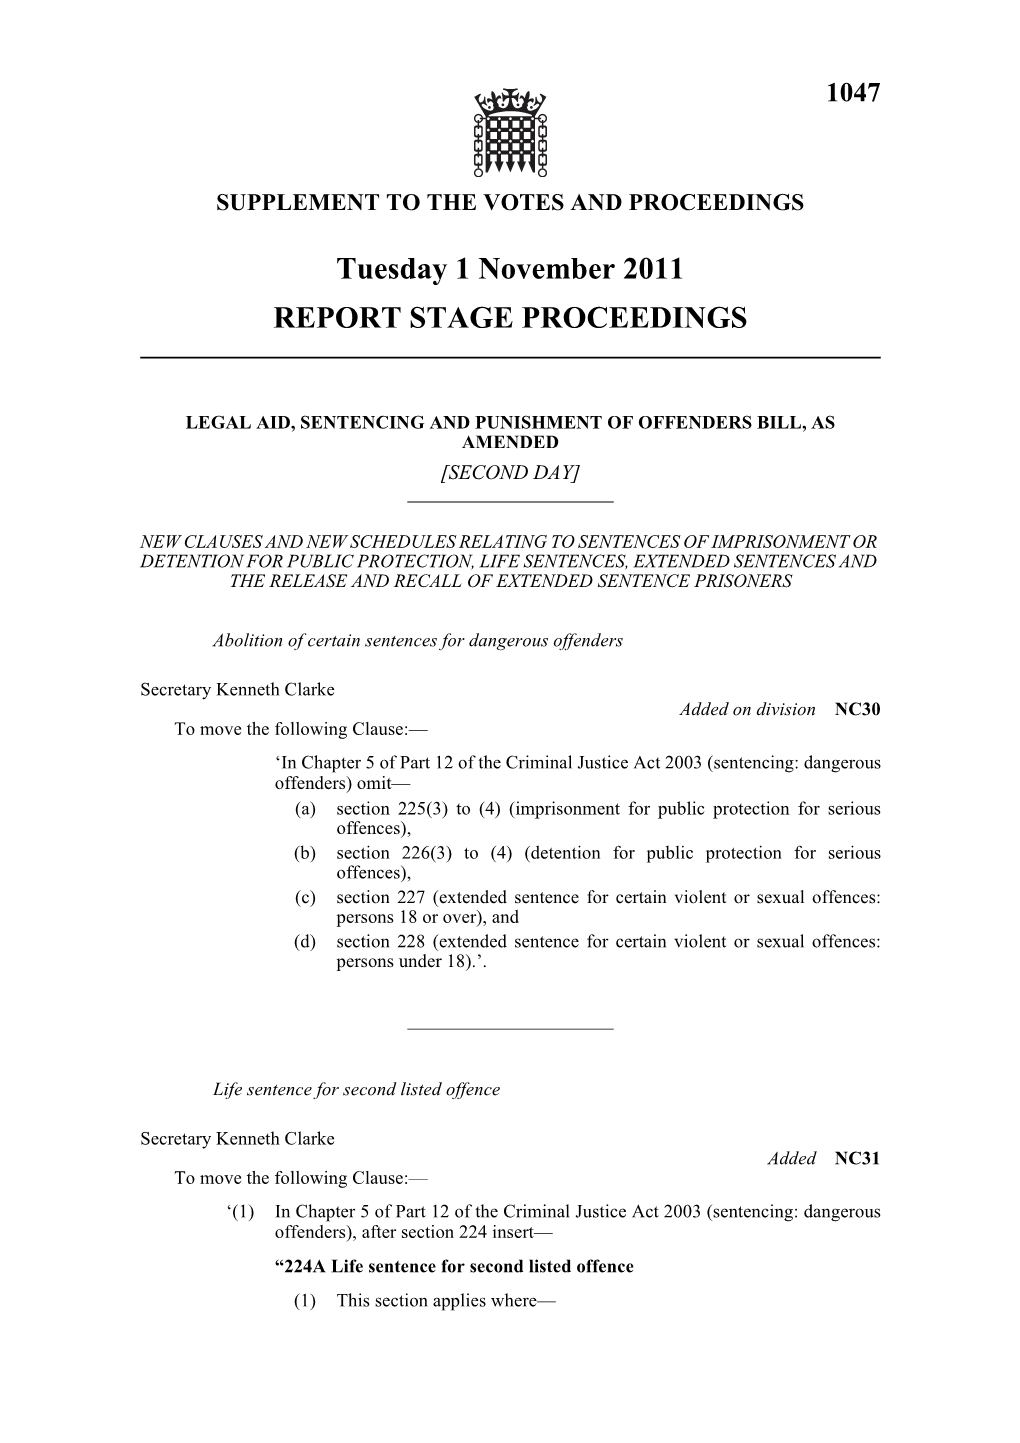 Tuesday 1 November 2011 REPORT STAGE PROCEEDINGS